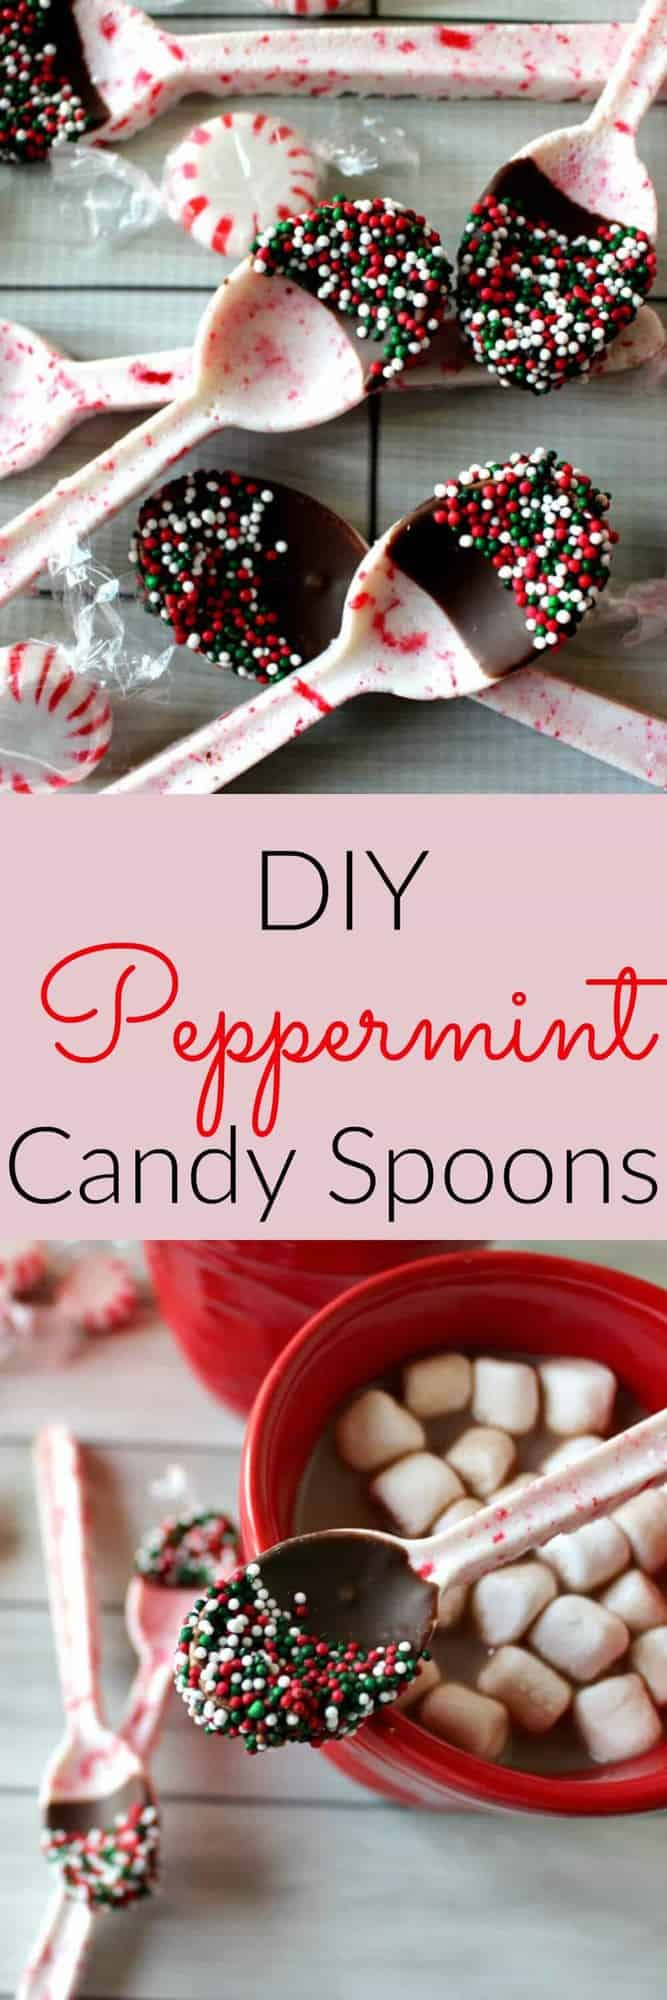 DIY Christmas Gifts For Girls
 DIY Peppermint Candy Spoons Princess Pinky Girl